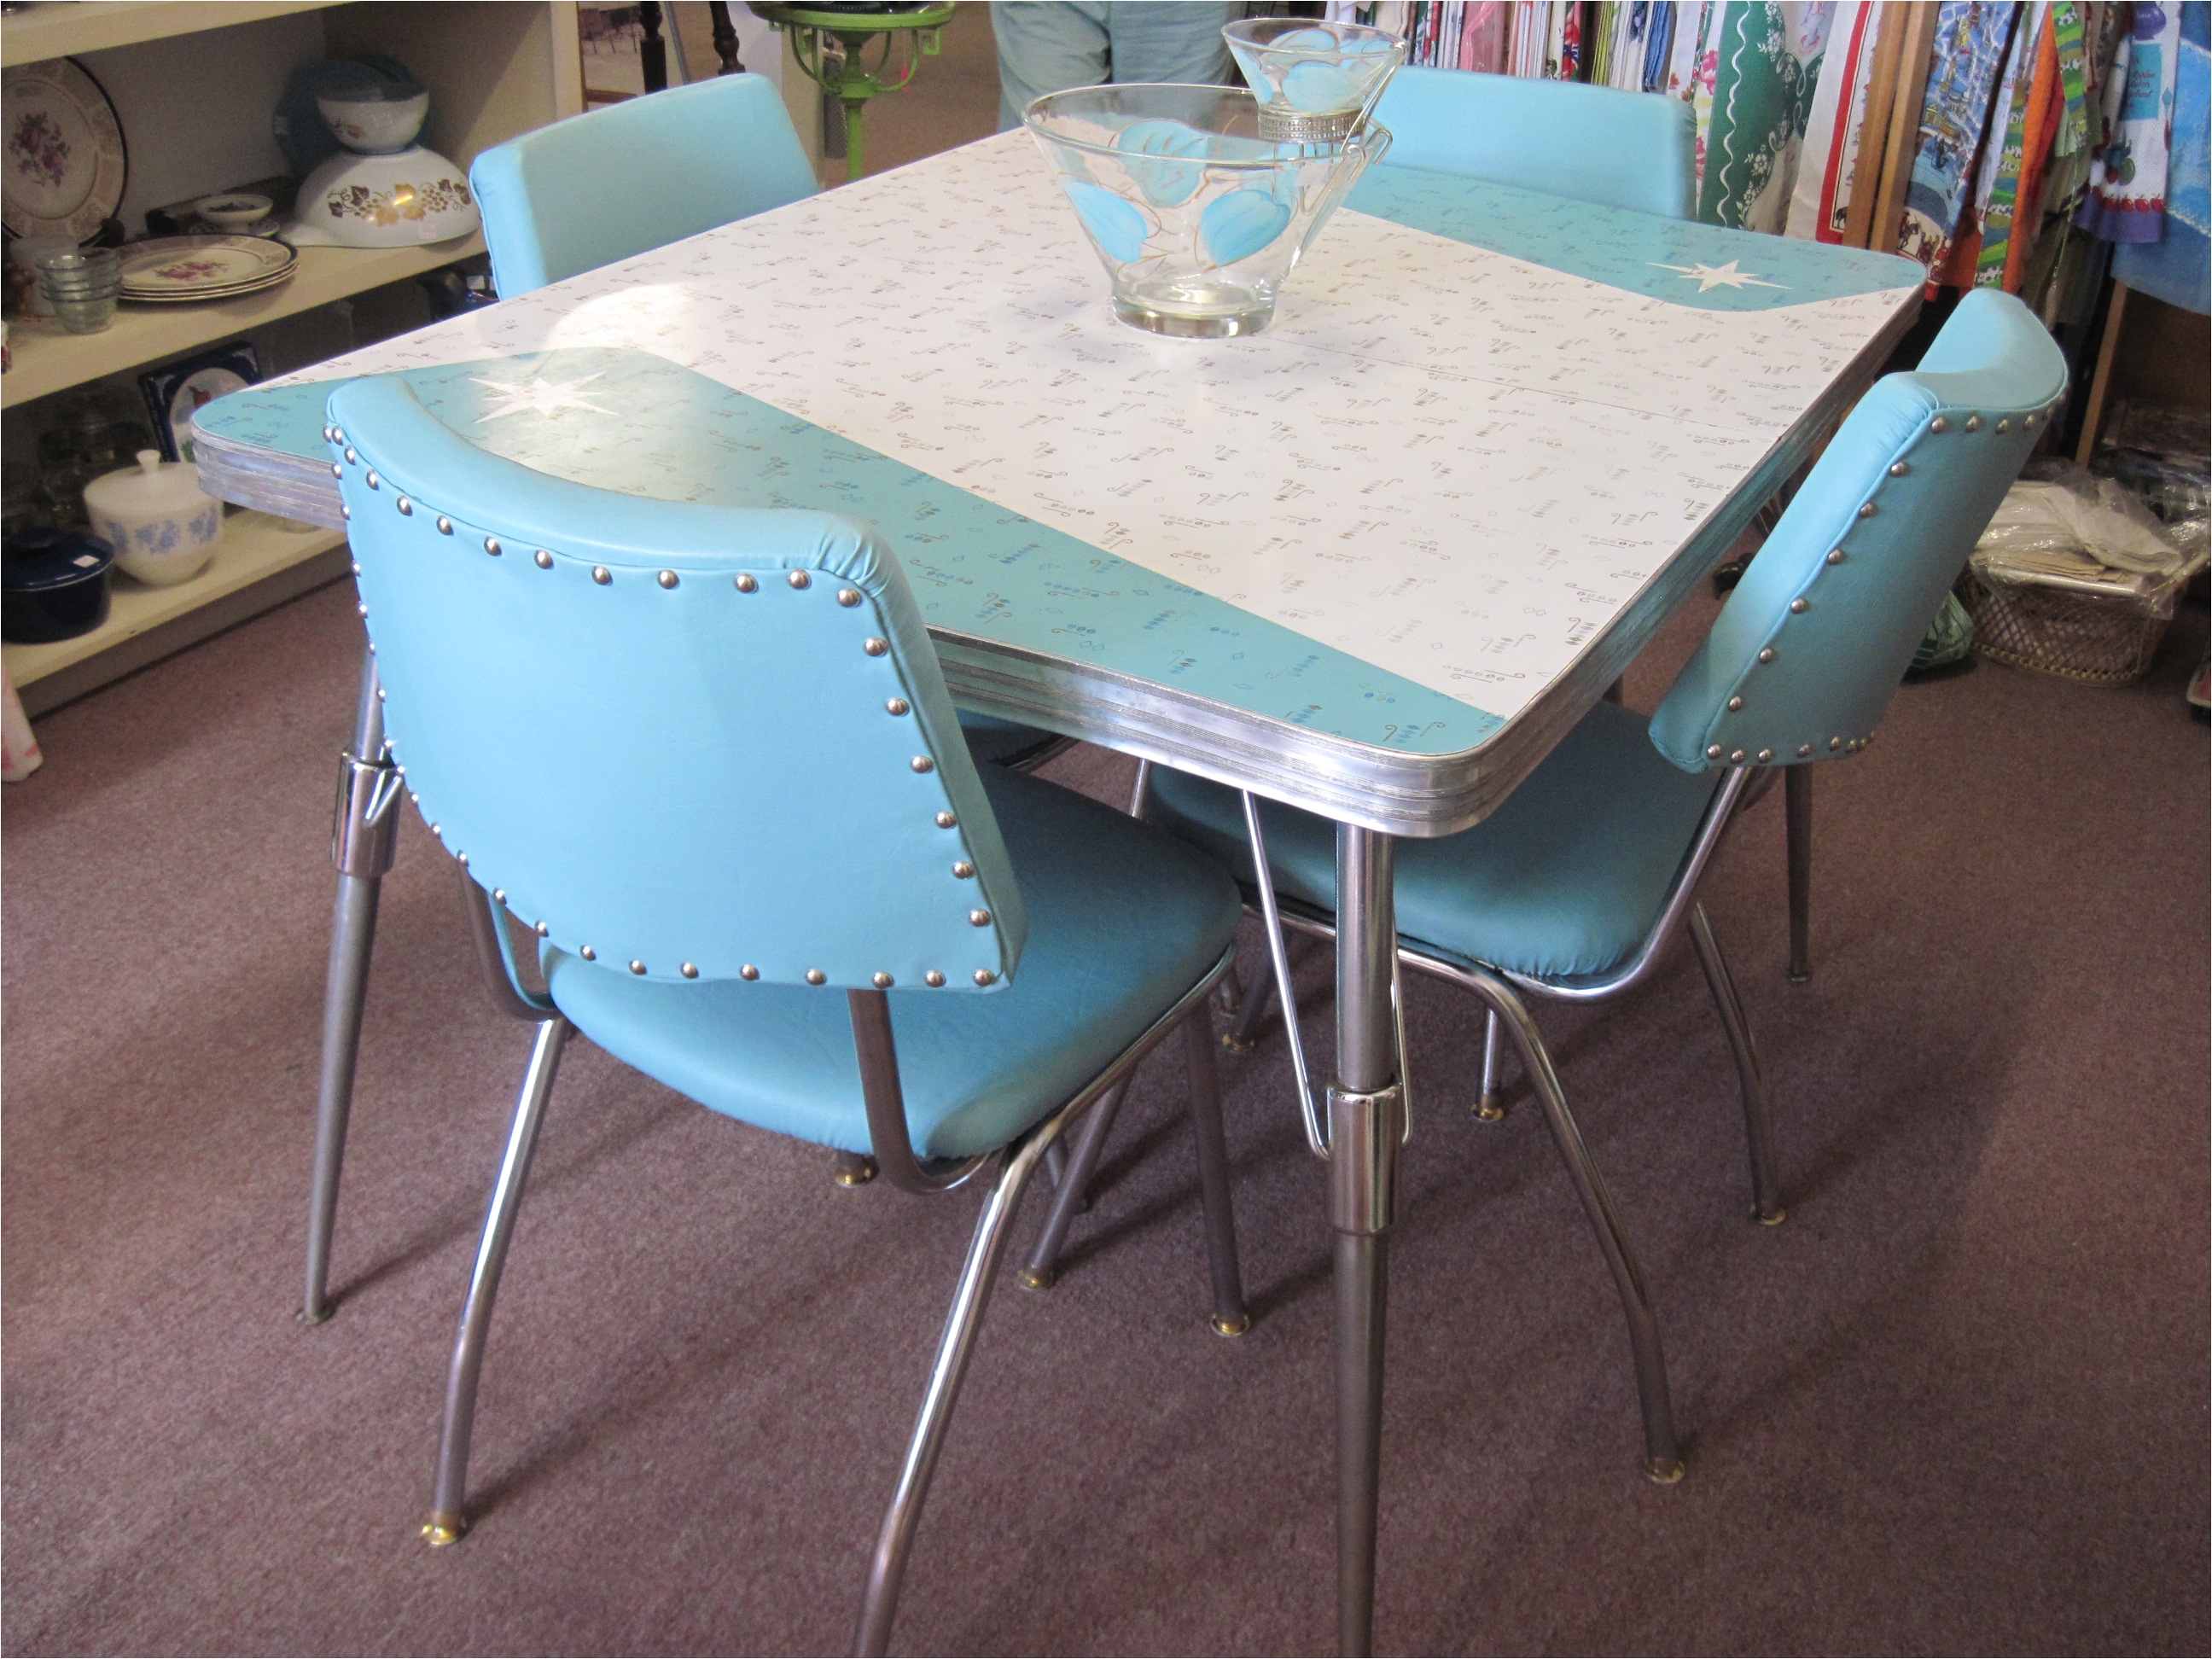 Formica Table and Chairs for Sale Australia Transform Your Kitchen Into A Retro Kitchen Darbylanefurniture Com